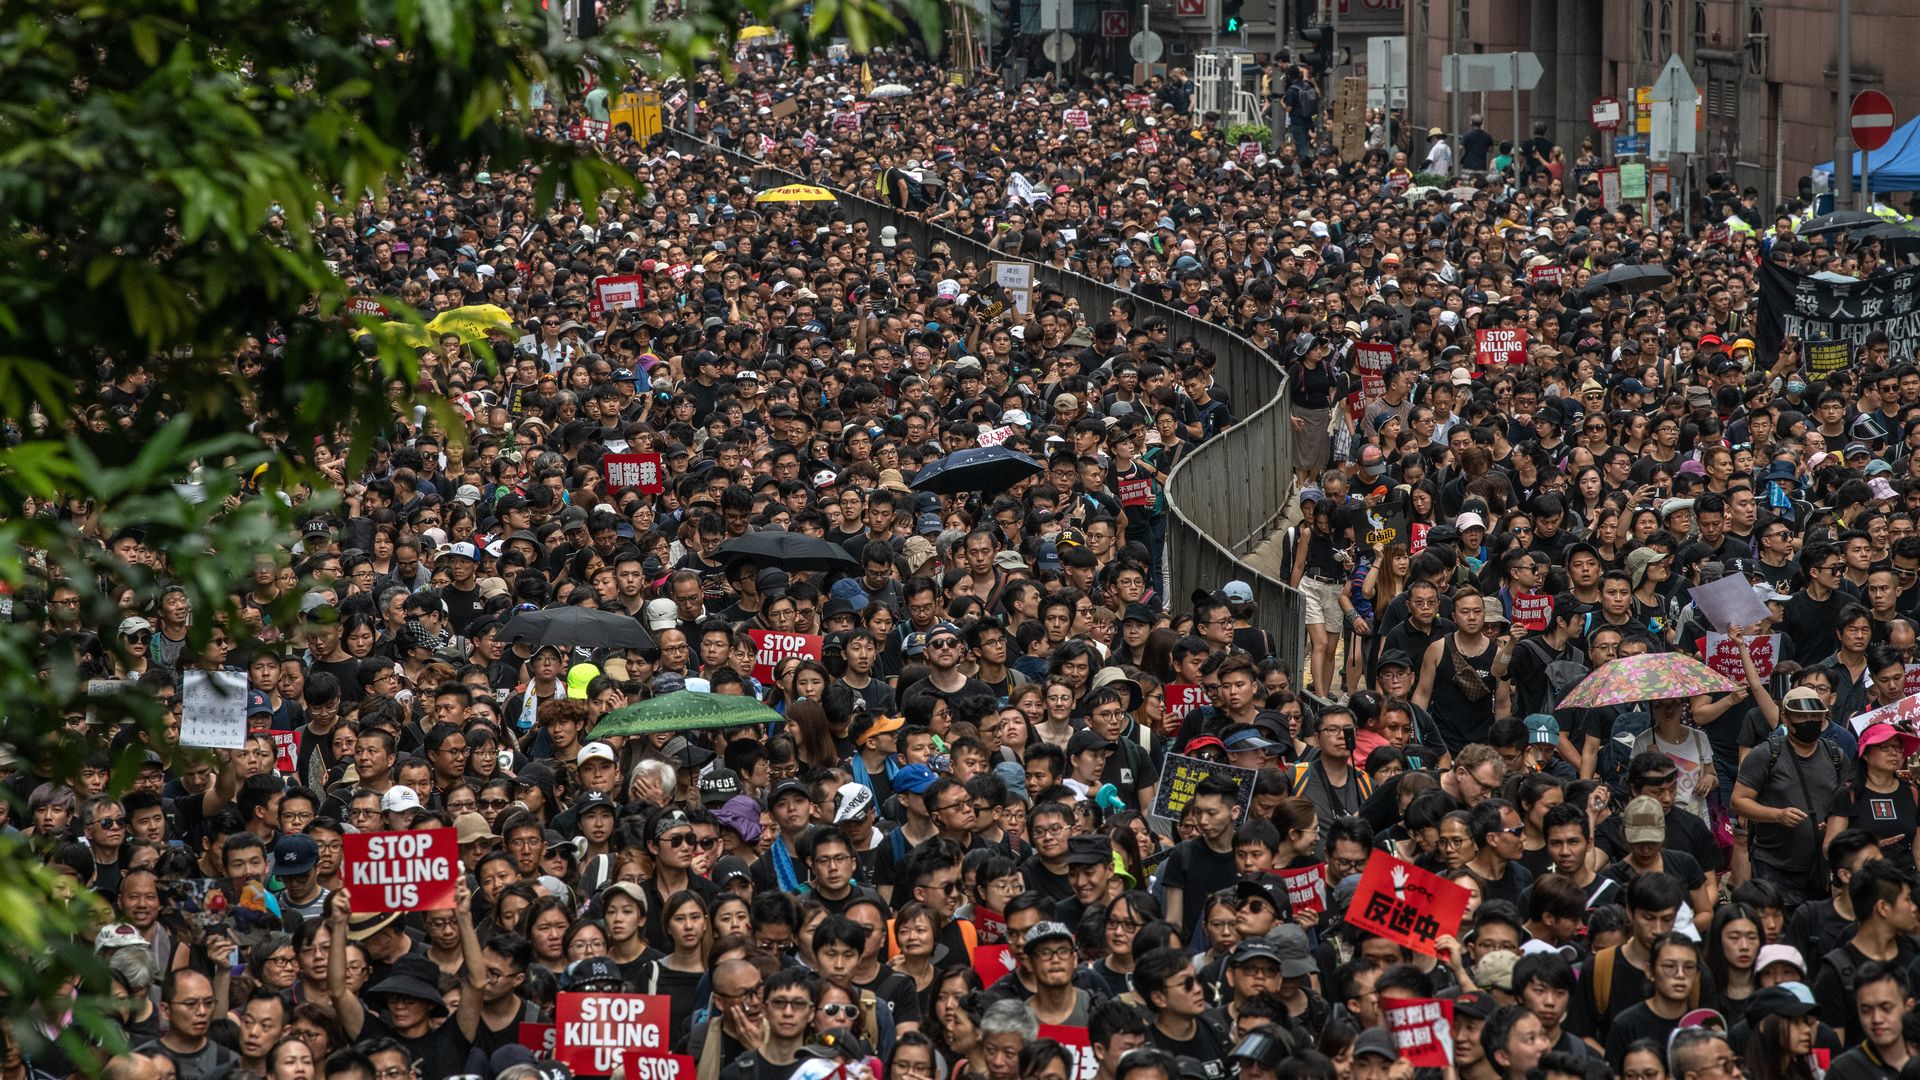 Thousands rally in Hong Kong, despite clashes with police days earlier.